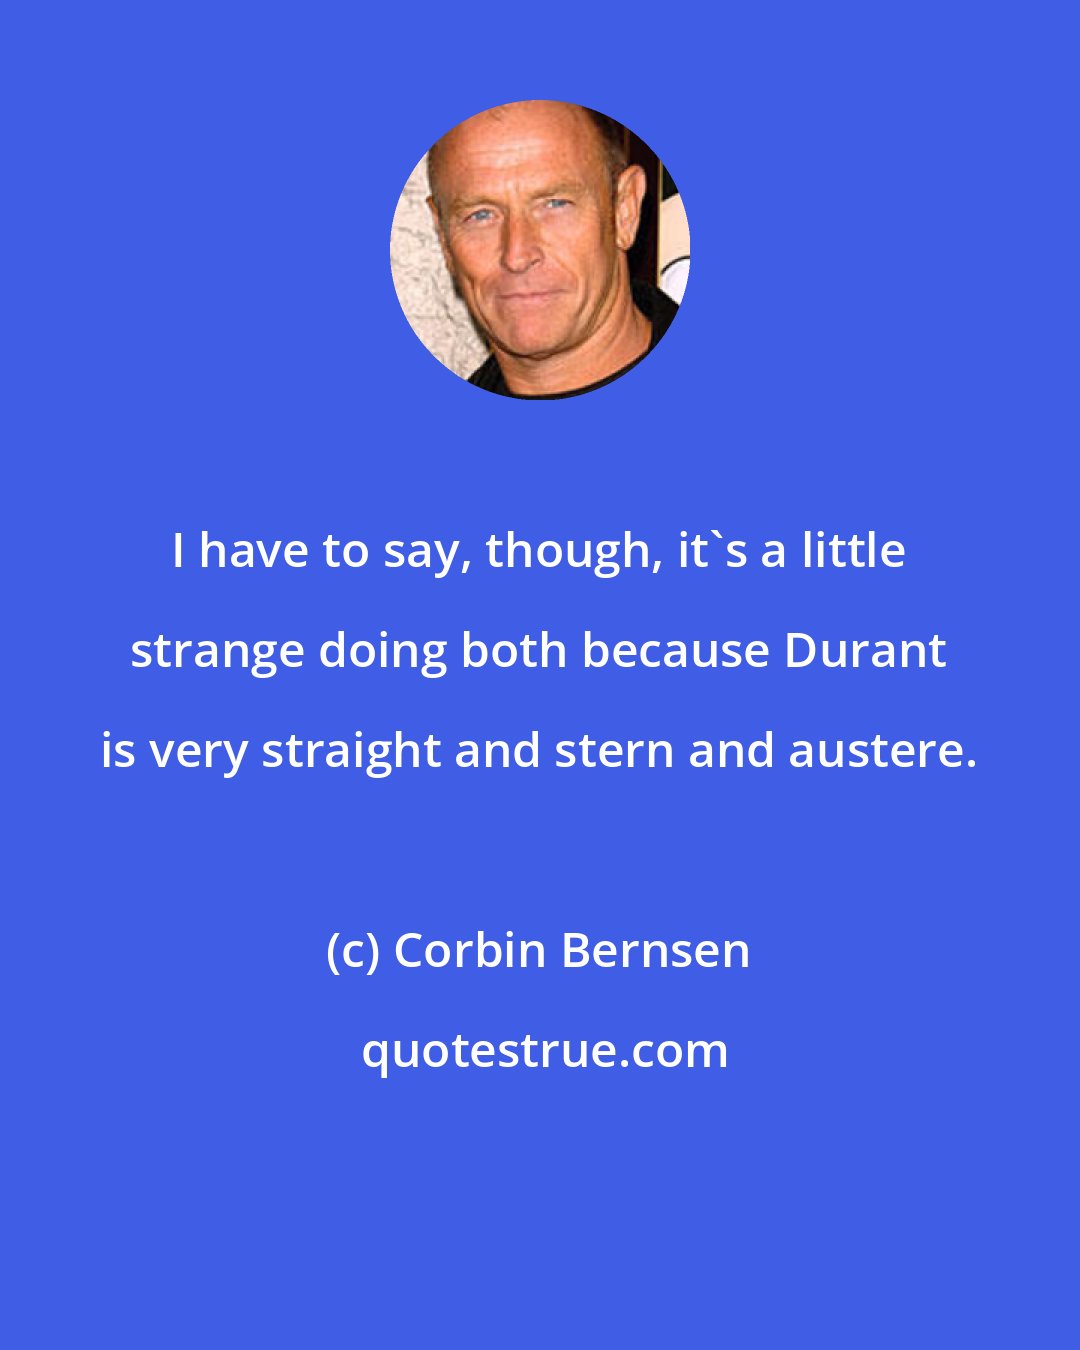 Corbin Bernsen: I have to say, though, it's a little strange doing both because Durant is very straight and stern and austere.